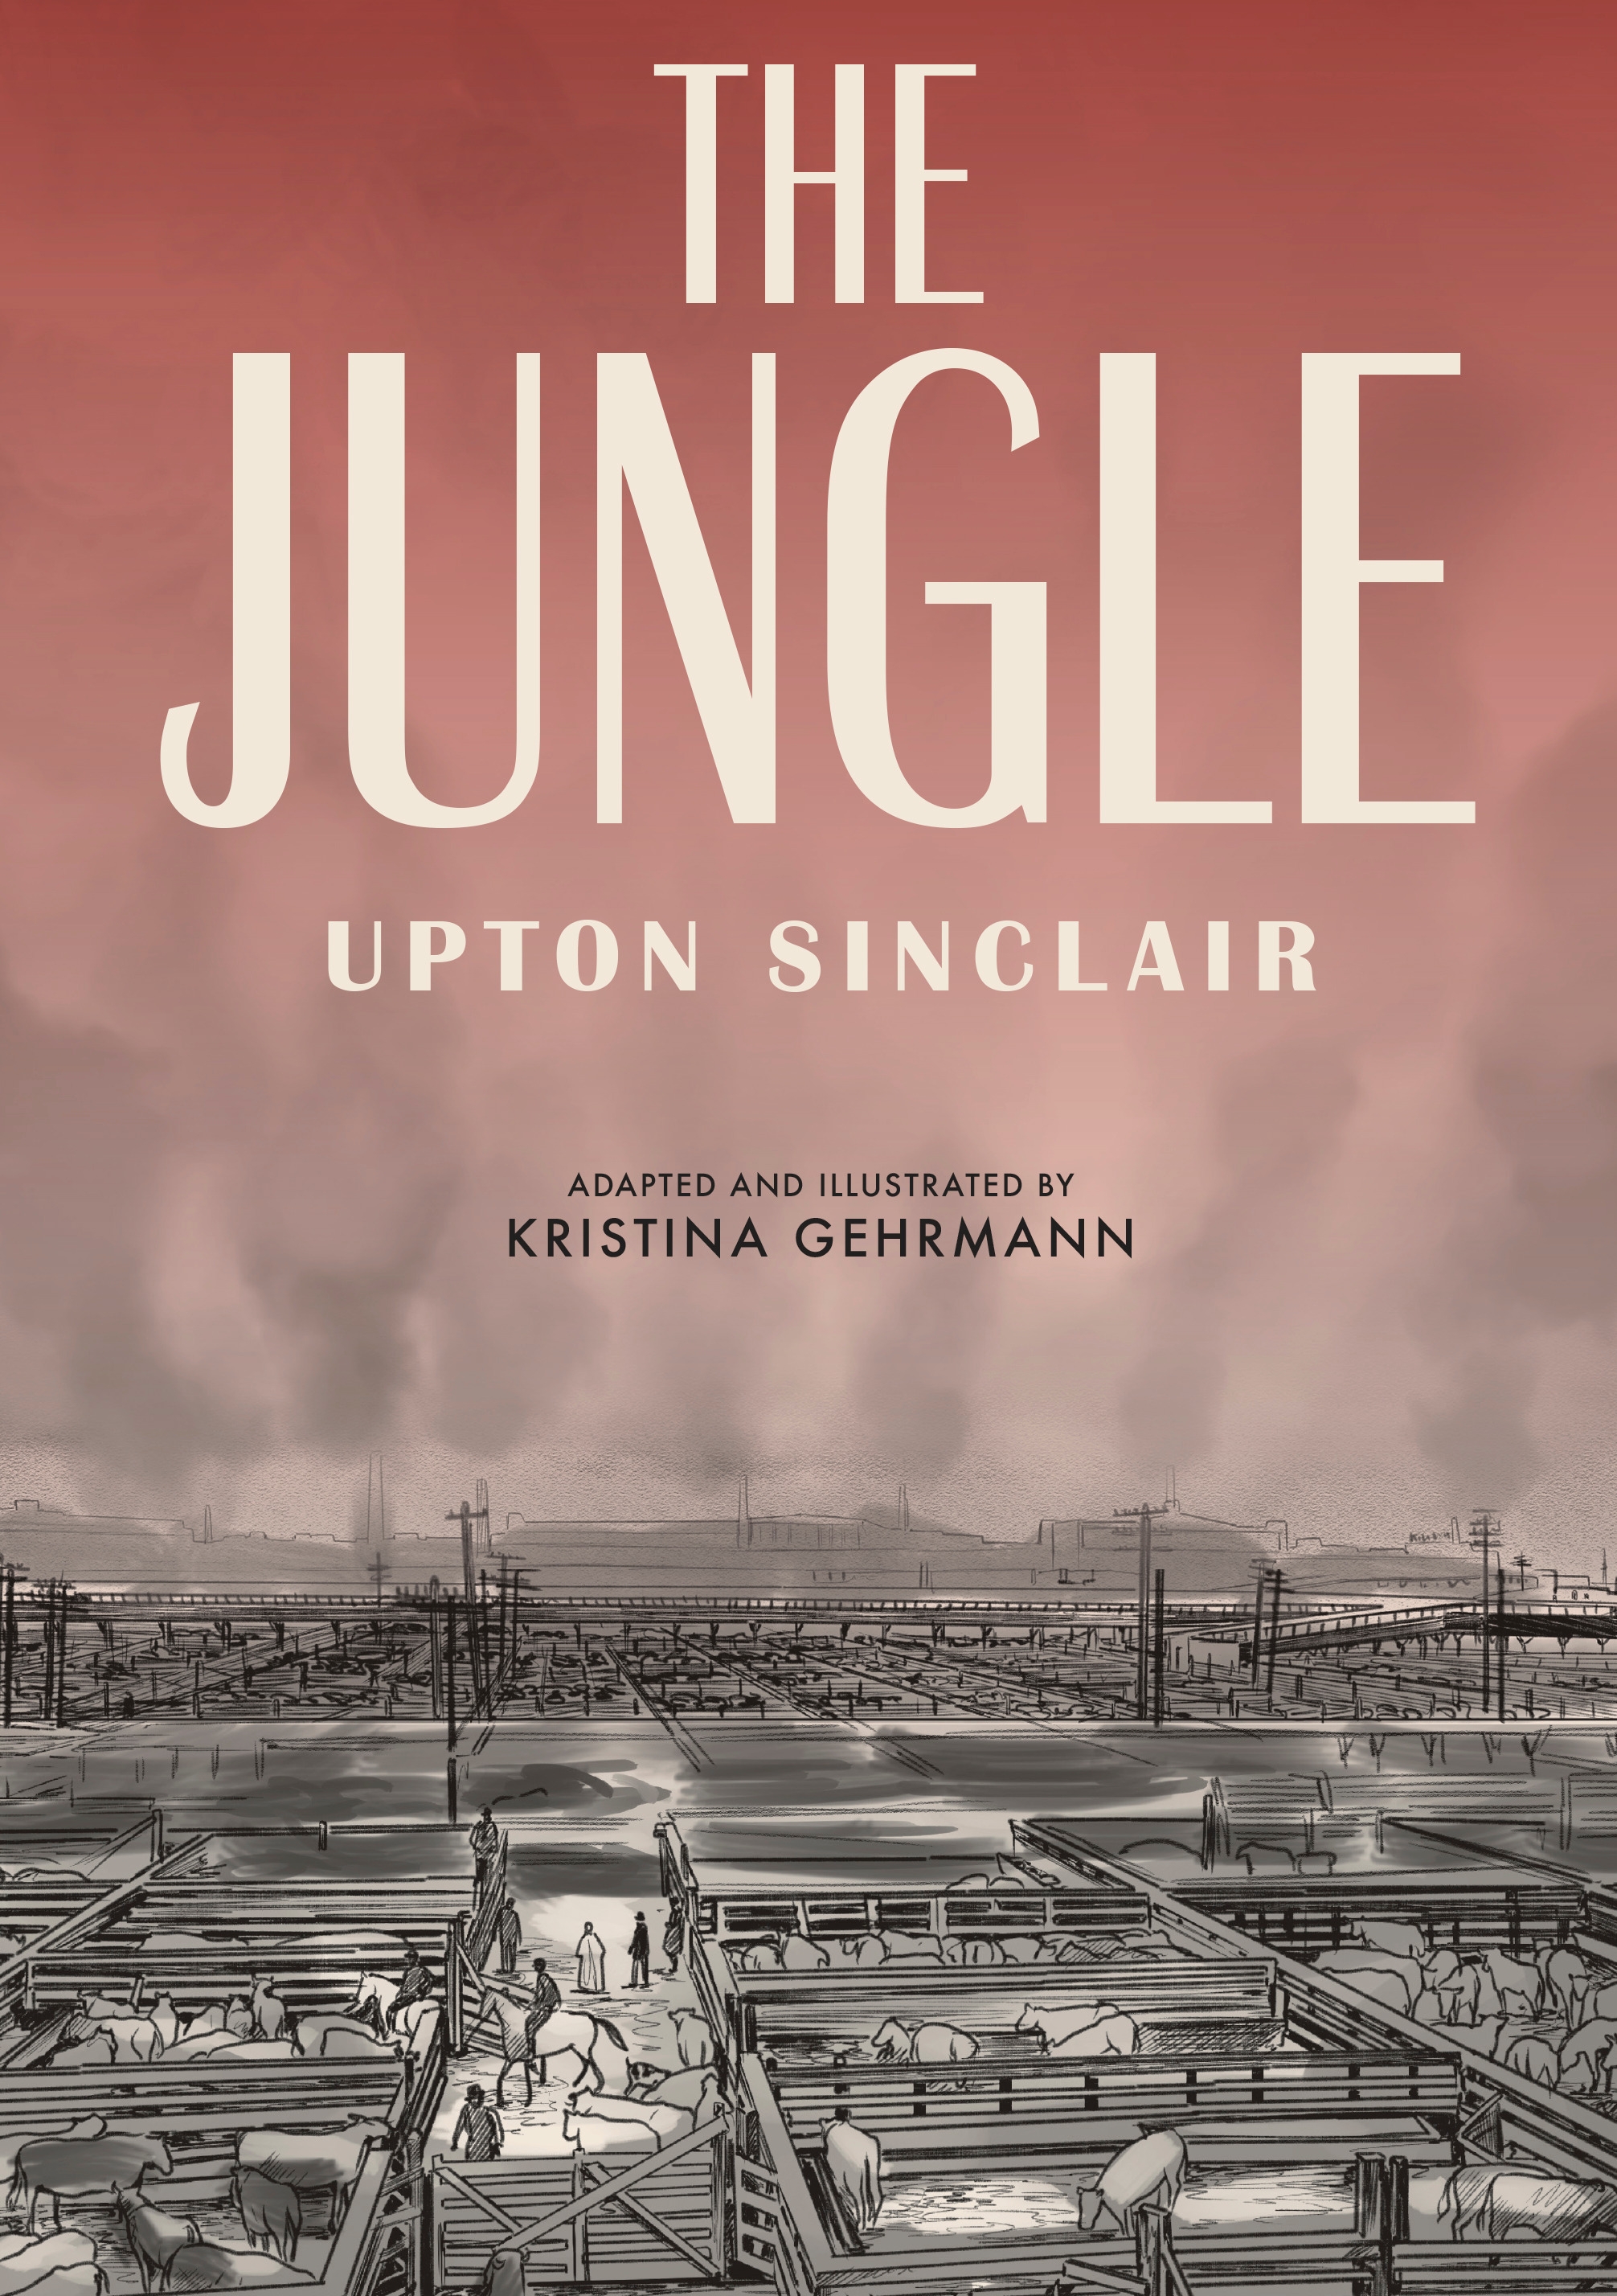 thesis of the jungle by upton sinclair